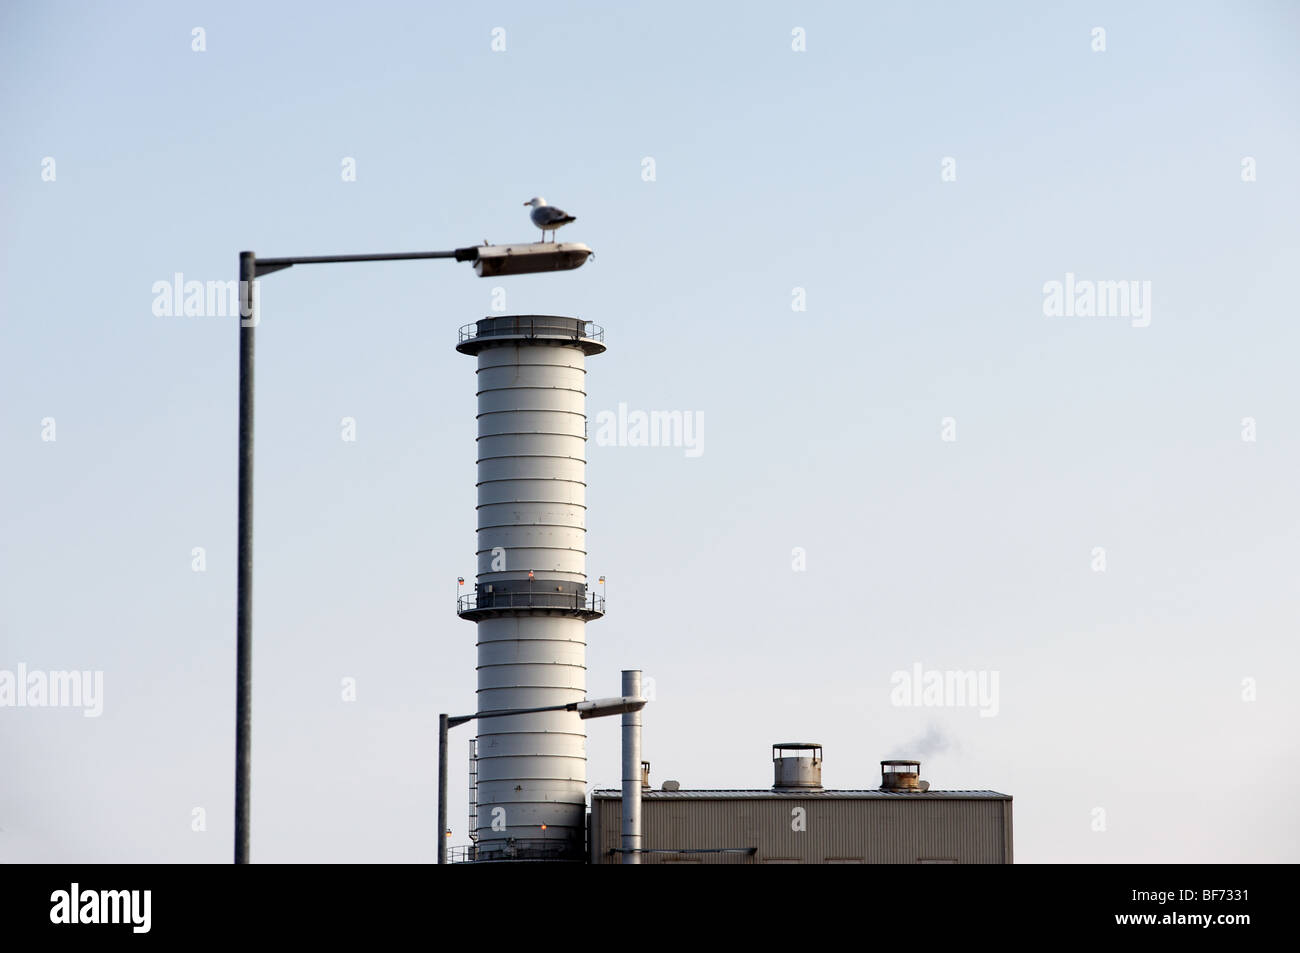 Combined cycle gas turbine power station, Great Yarmouth, Norfolk, UK. Stock Photo